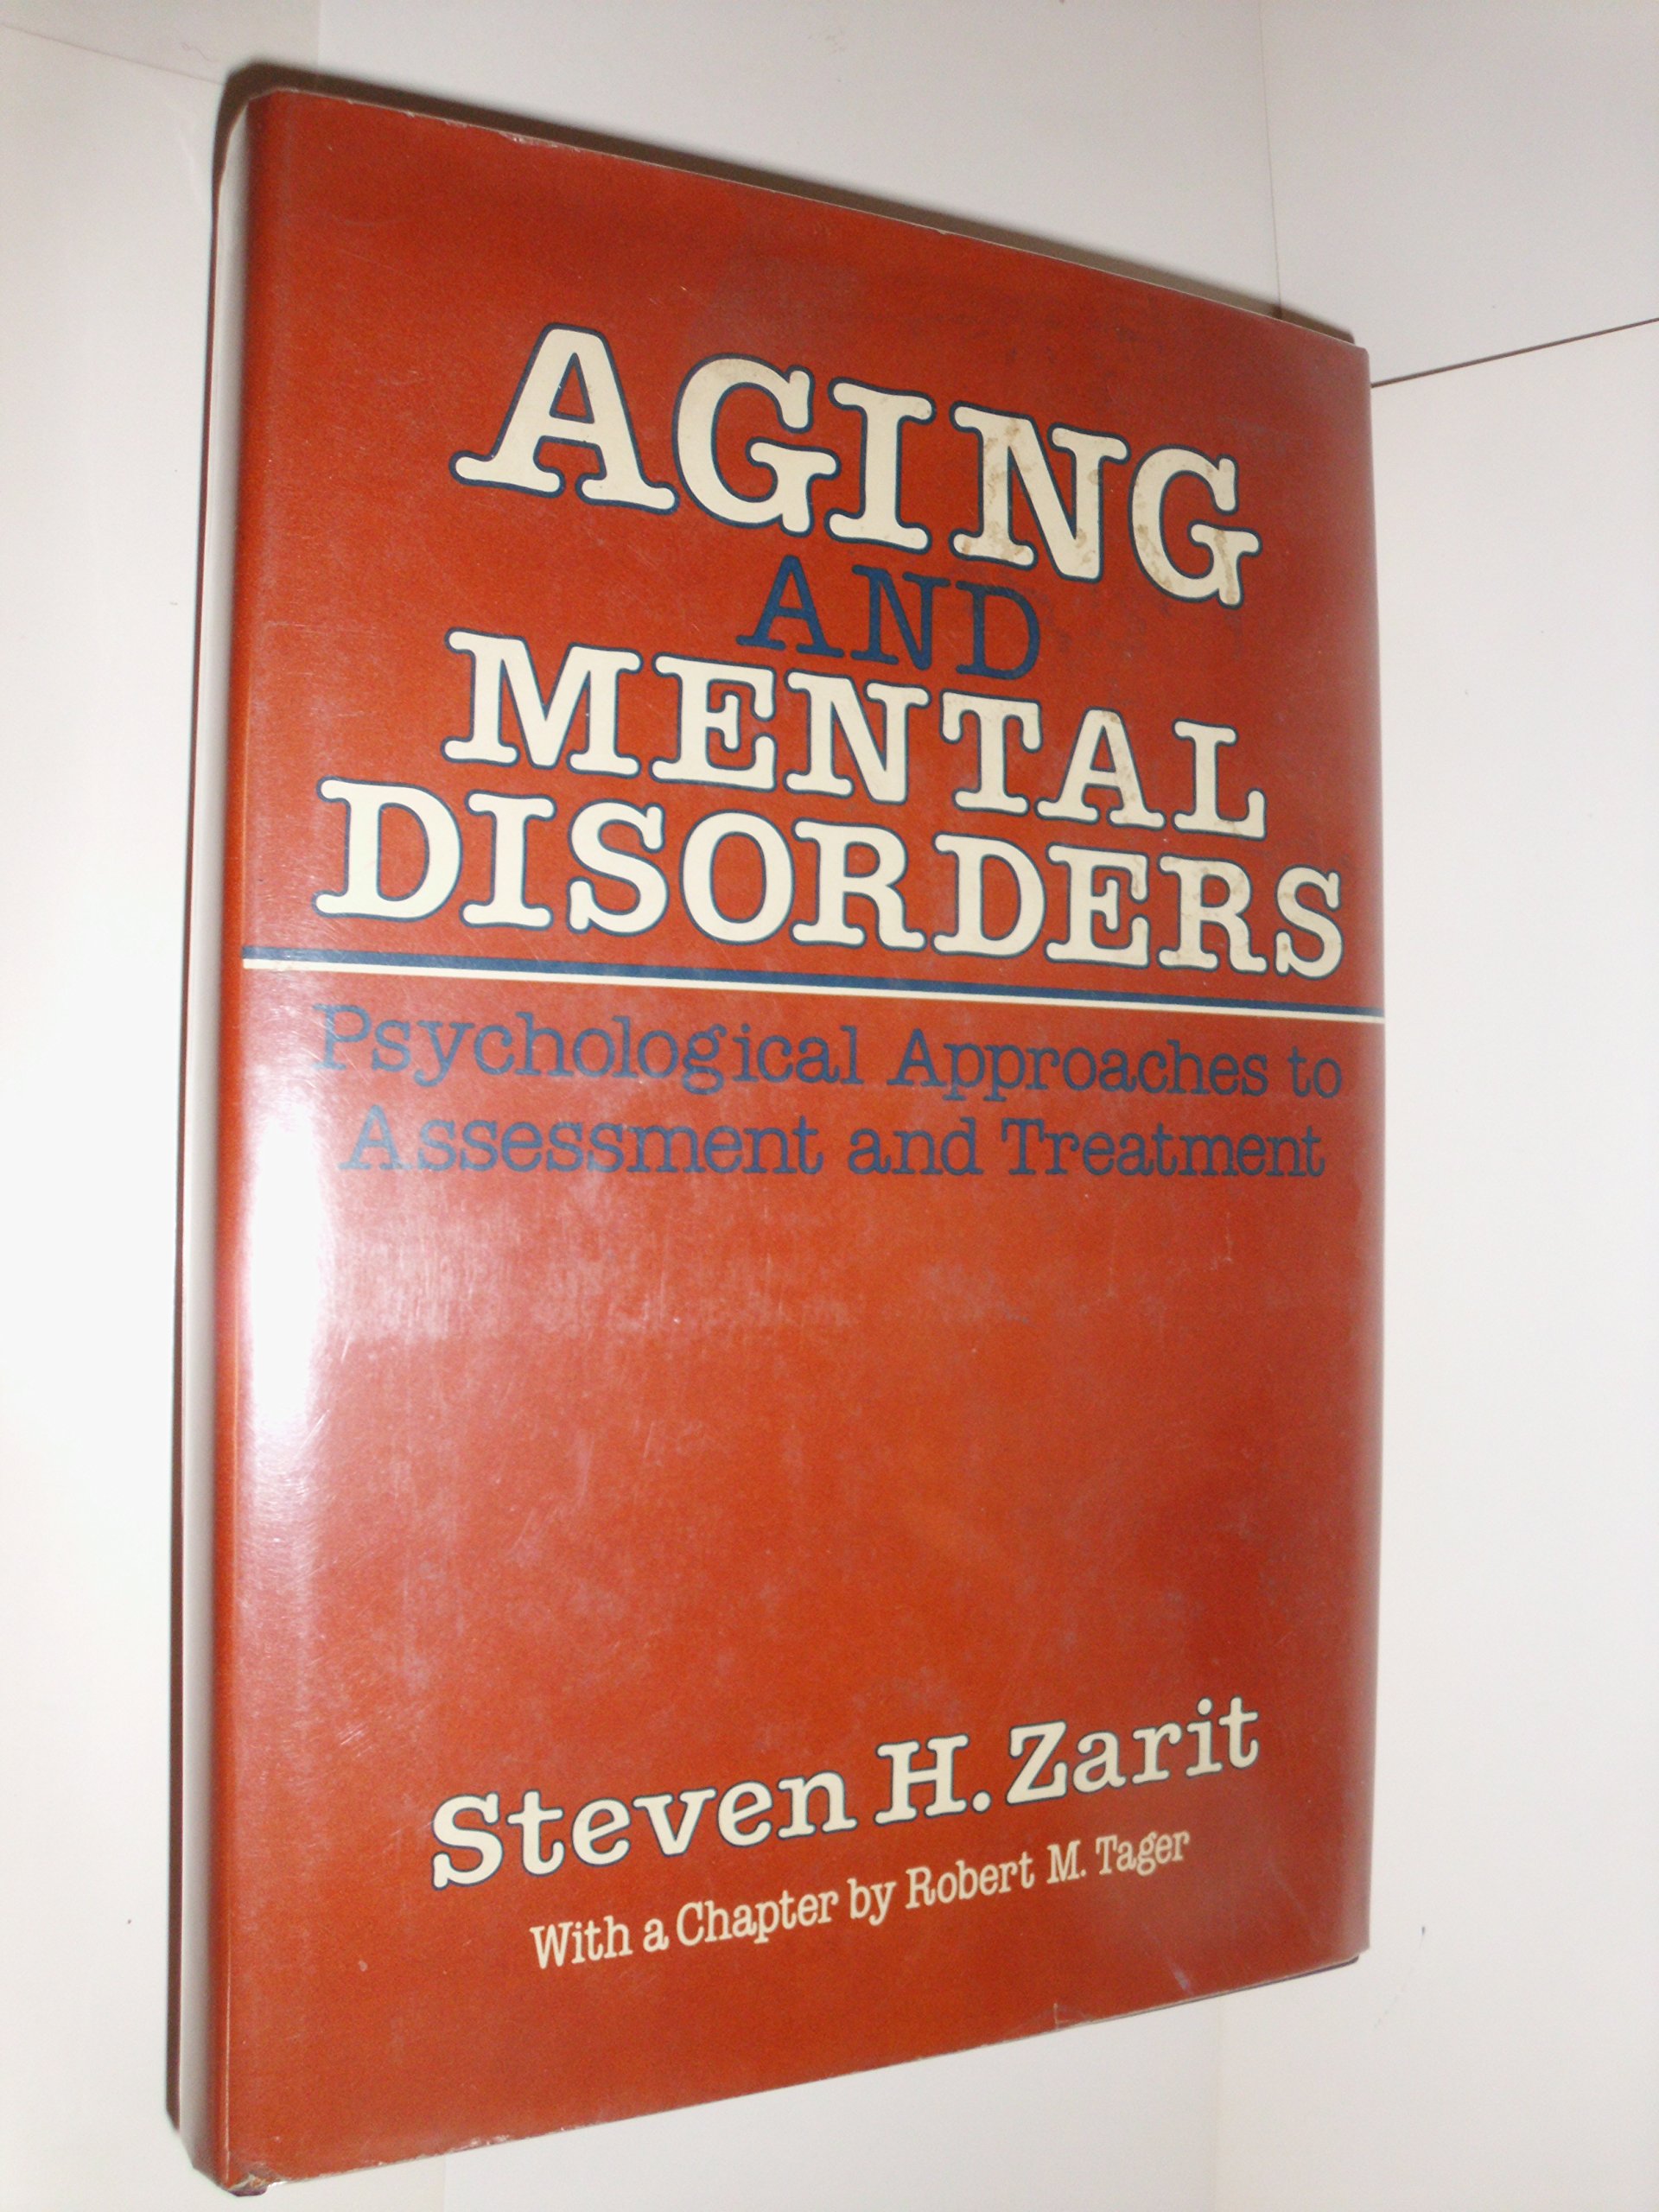 Aging and mental disorders magazine reviews